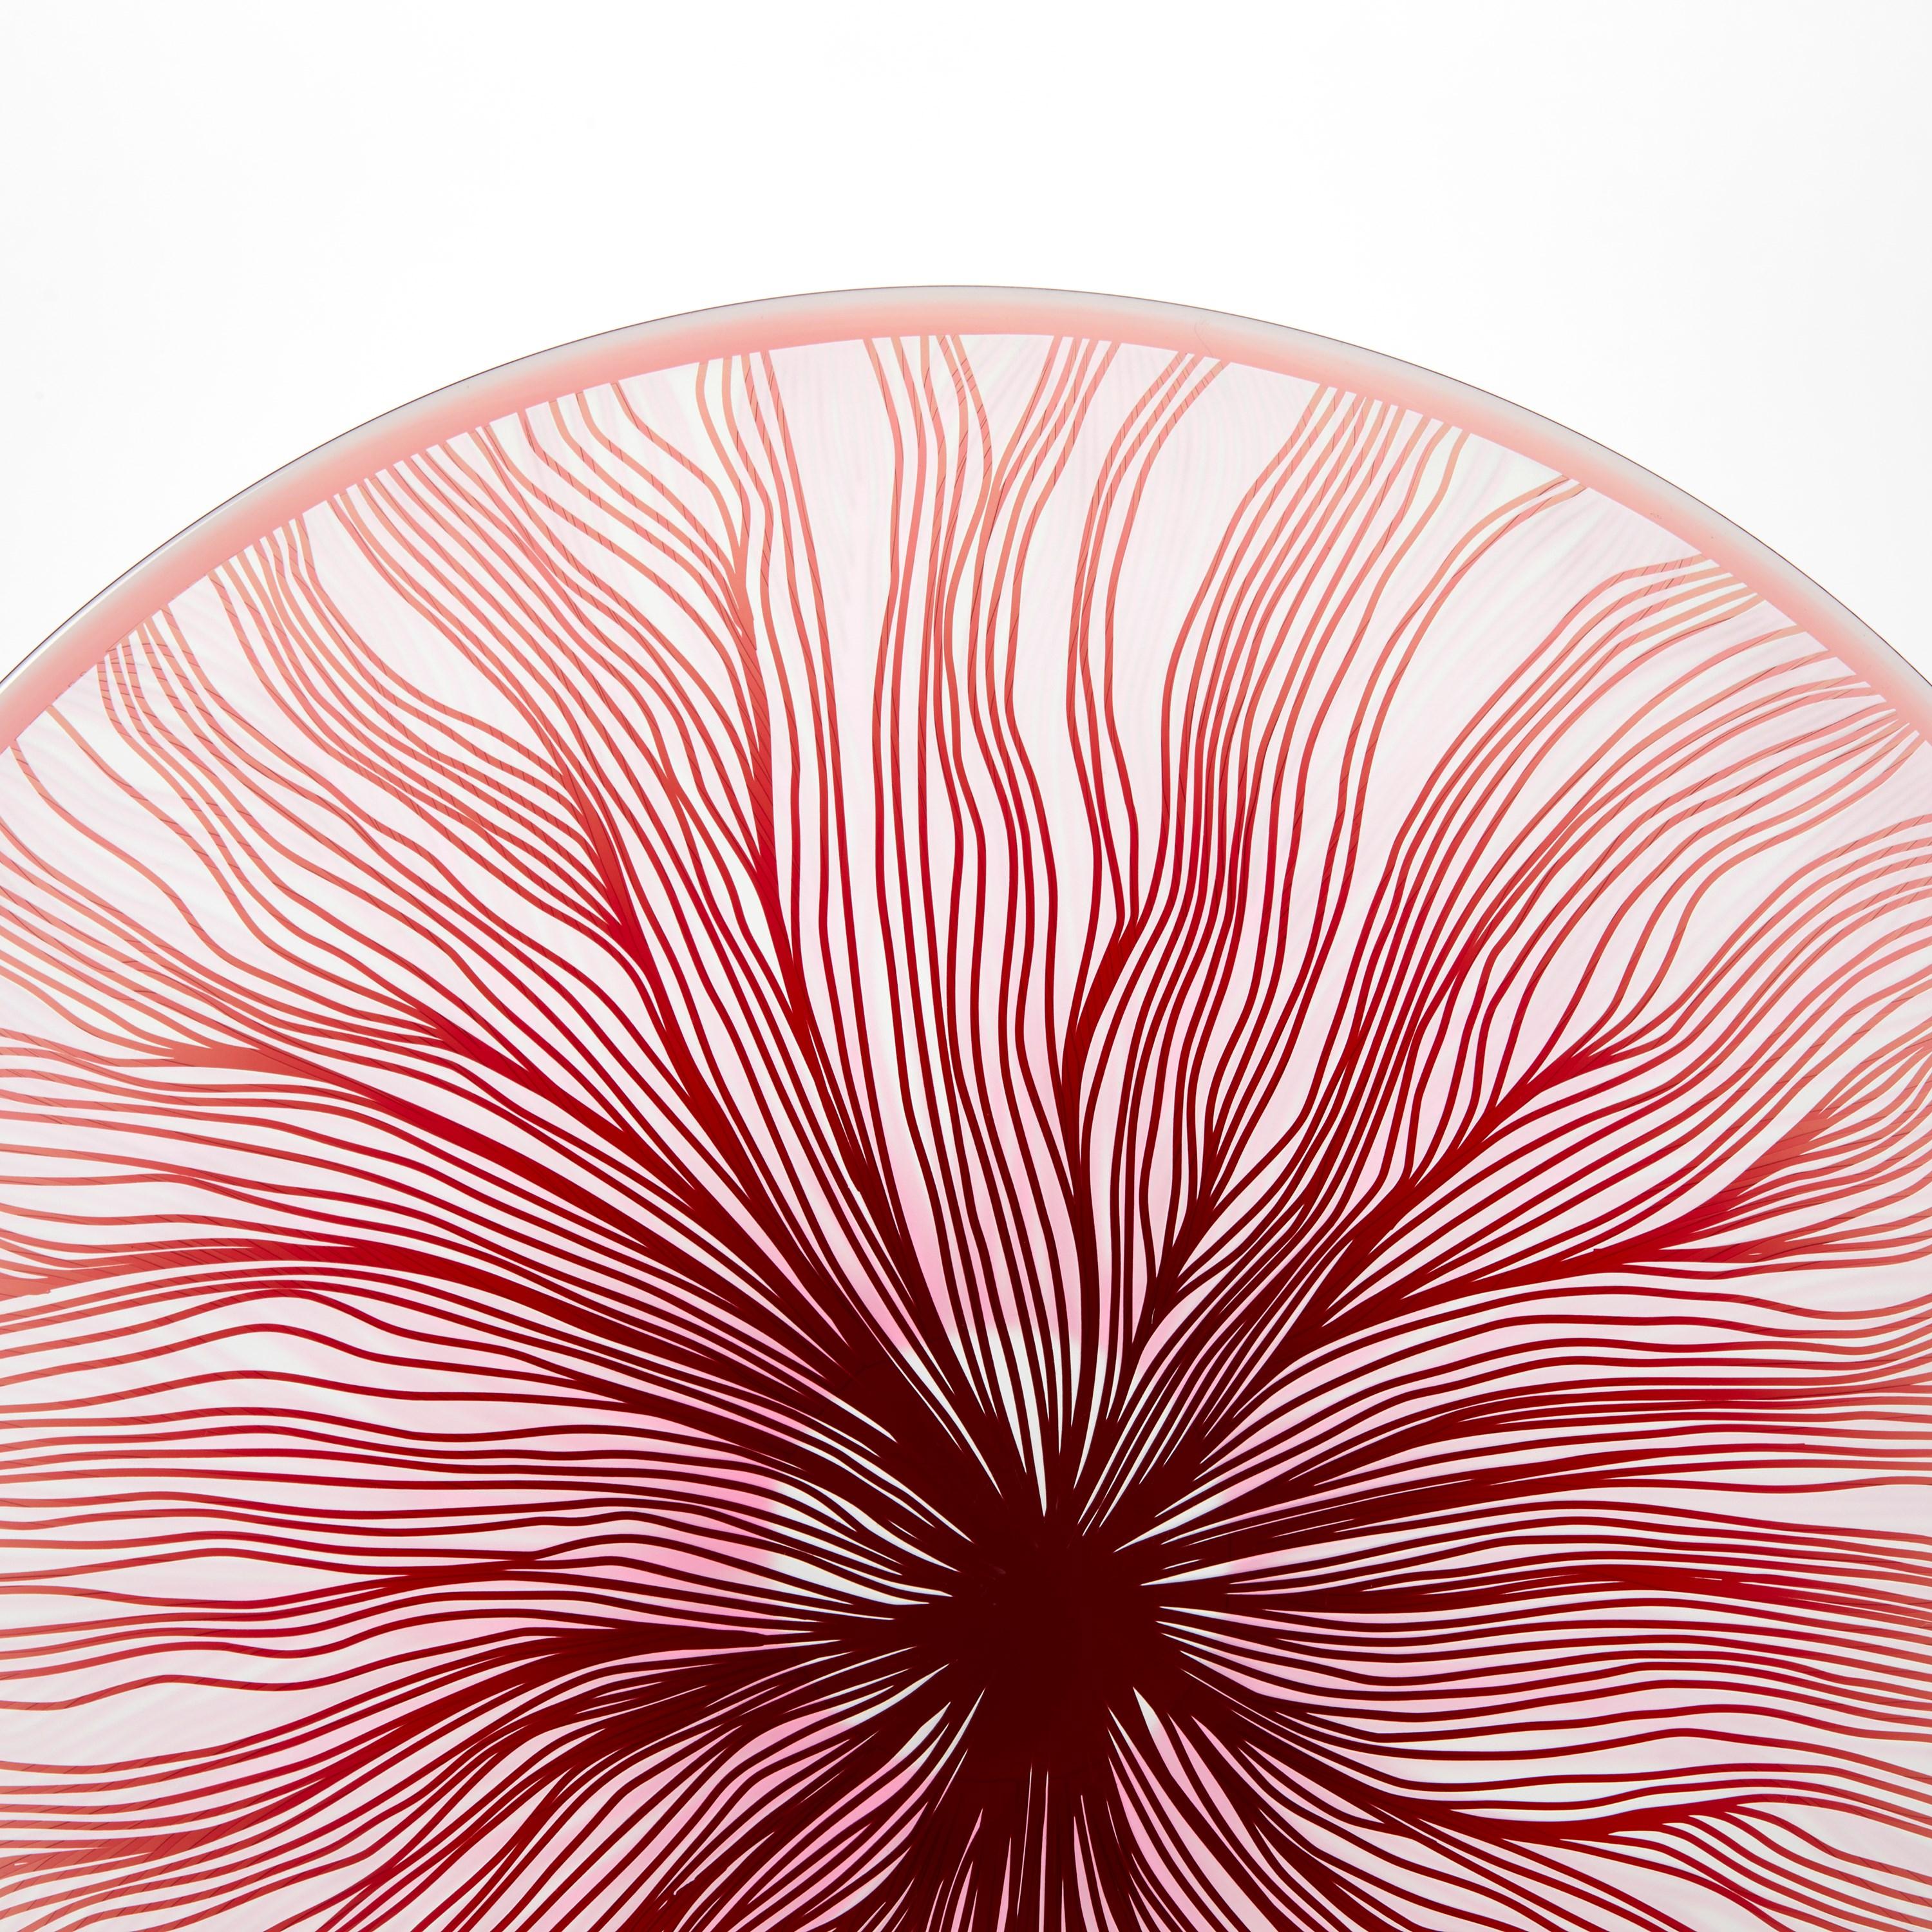 Hand-Crafted Solar Storm Ruby Red over Pale Pink, a linear cut glass artwork by Kate Jones For Sale